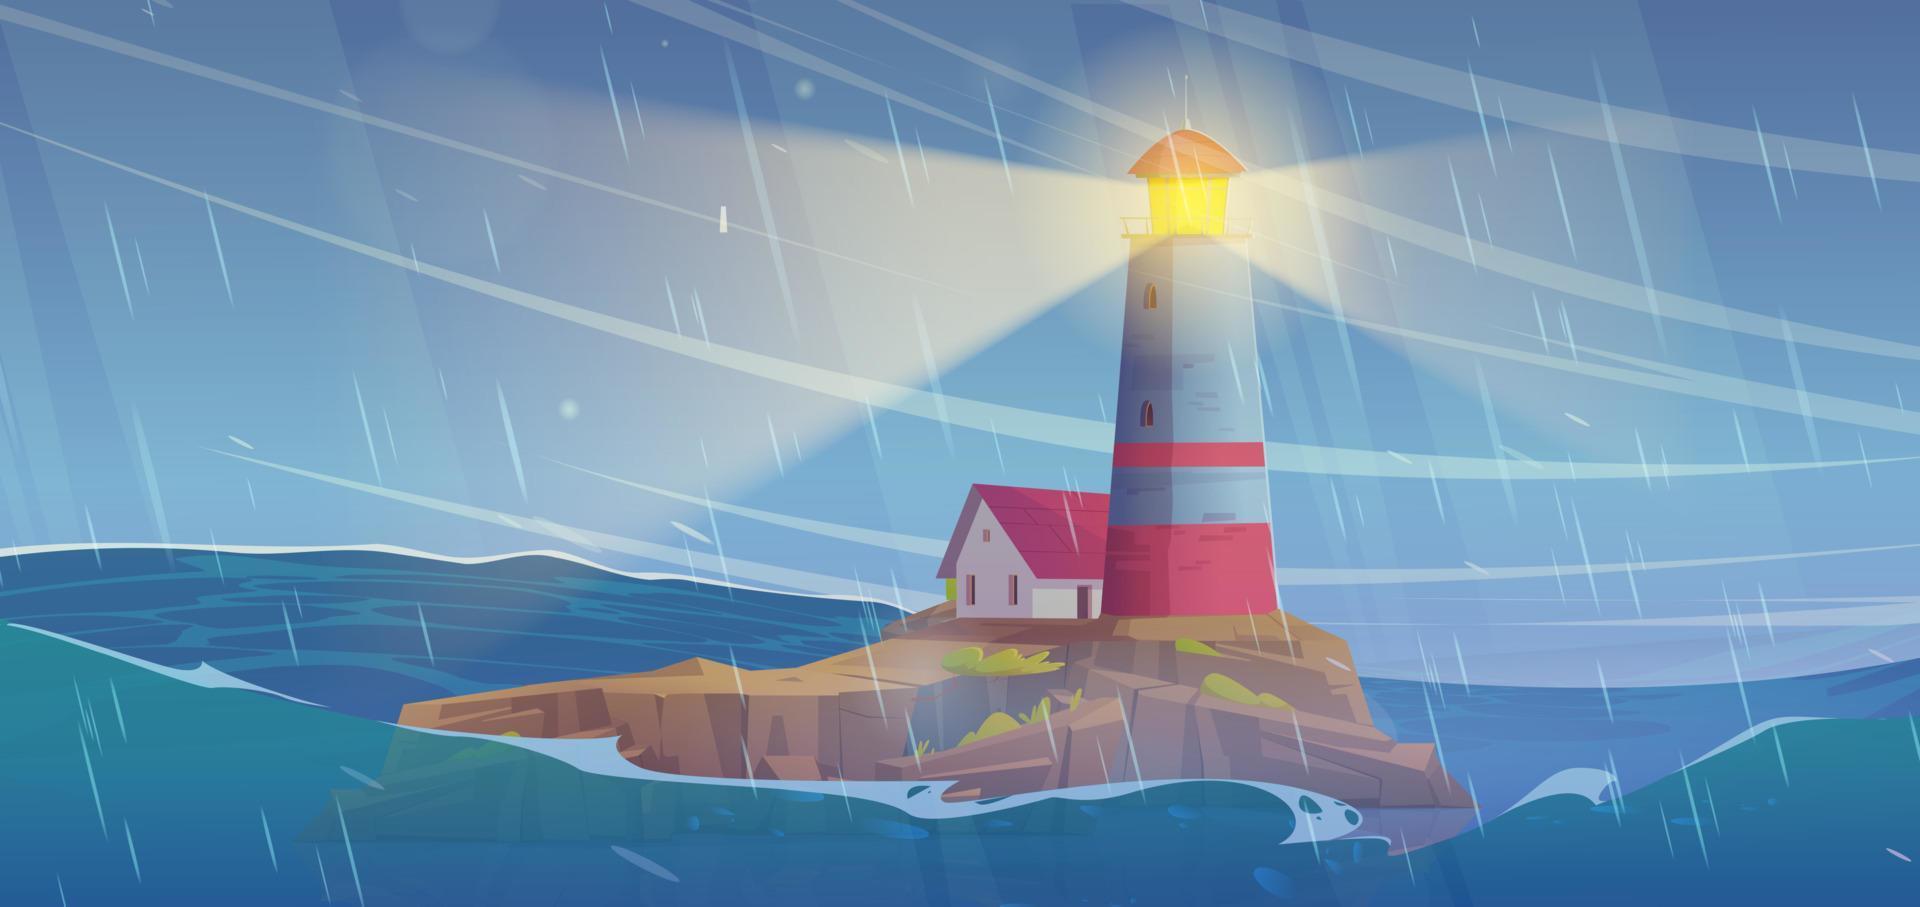 Lighthouse on cliff island in storm sea vector